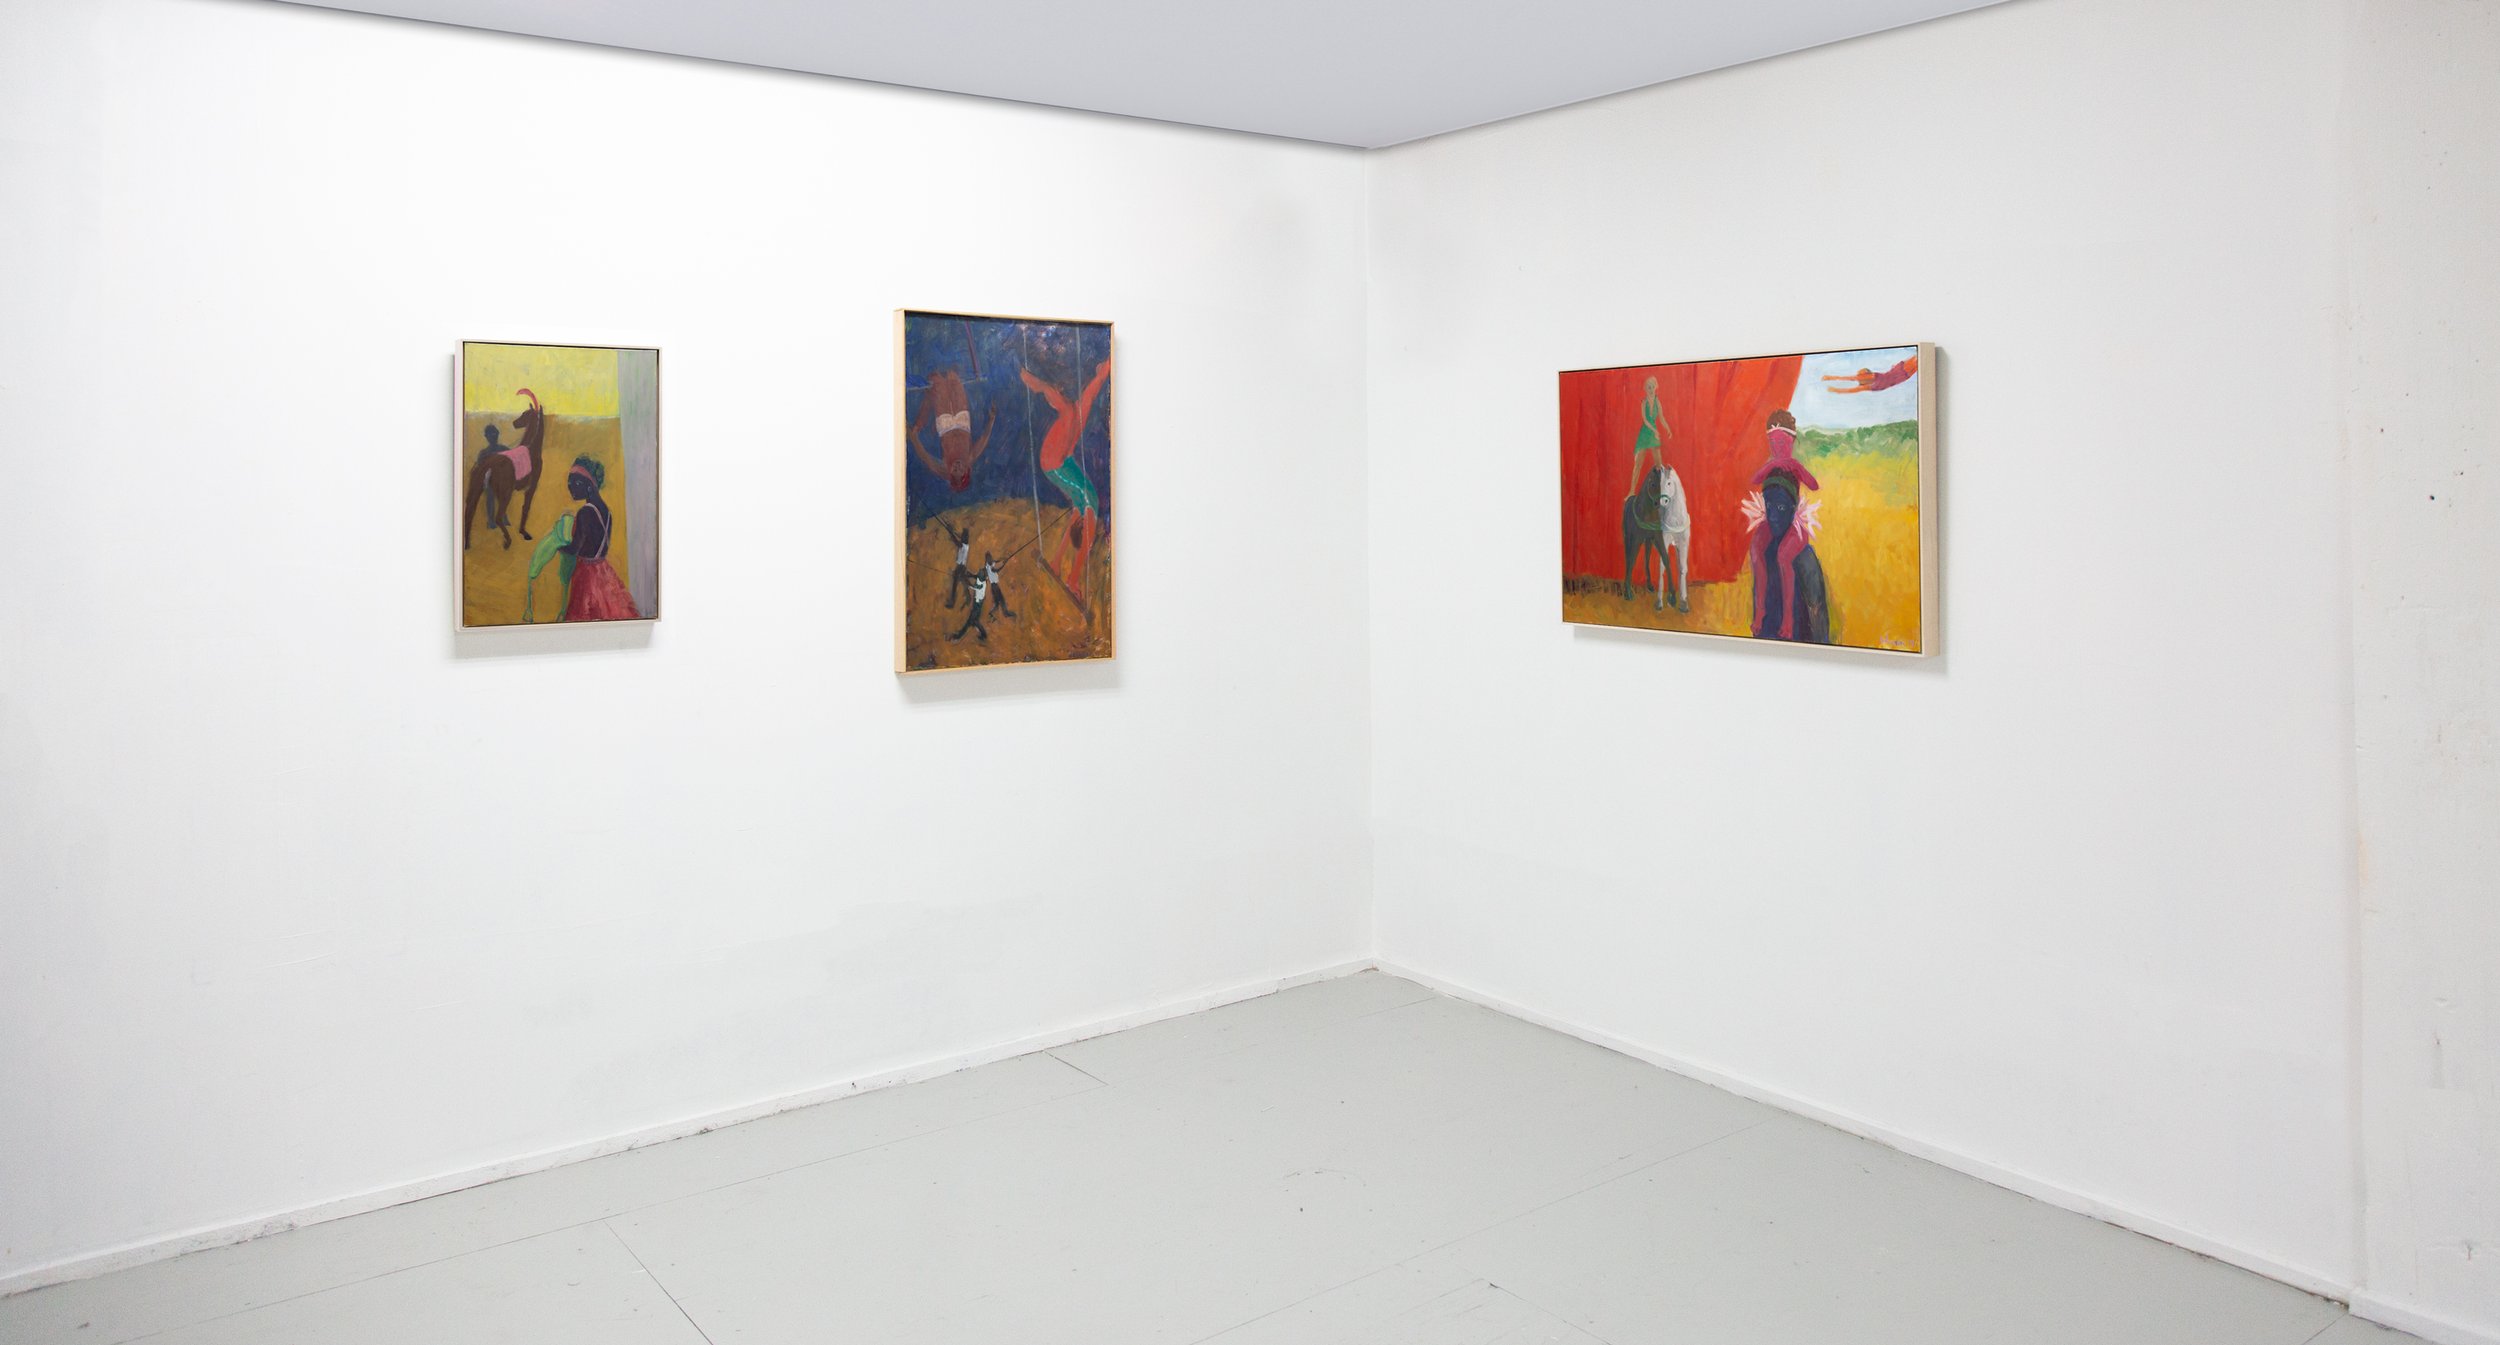  From left to right:  Circus Rider (with green saddle) , 2020, Oil on canvas, 25 x 17”;  Trapeze Artists , 2018, Oil on canvas, 34 x 30”;  Three, Two, One , 2019, Oil on canvas, 26 x 42”       